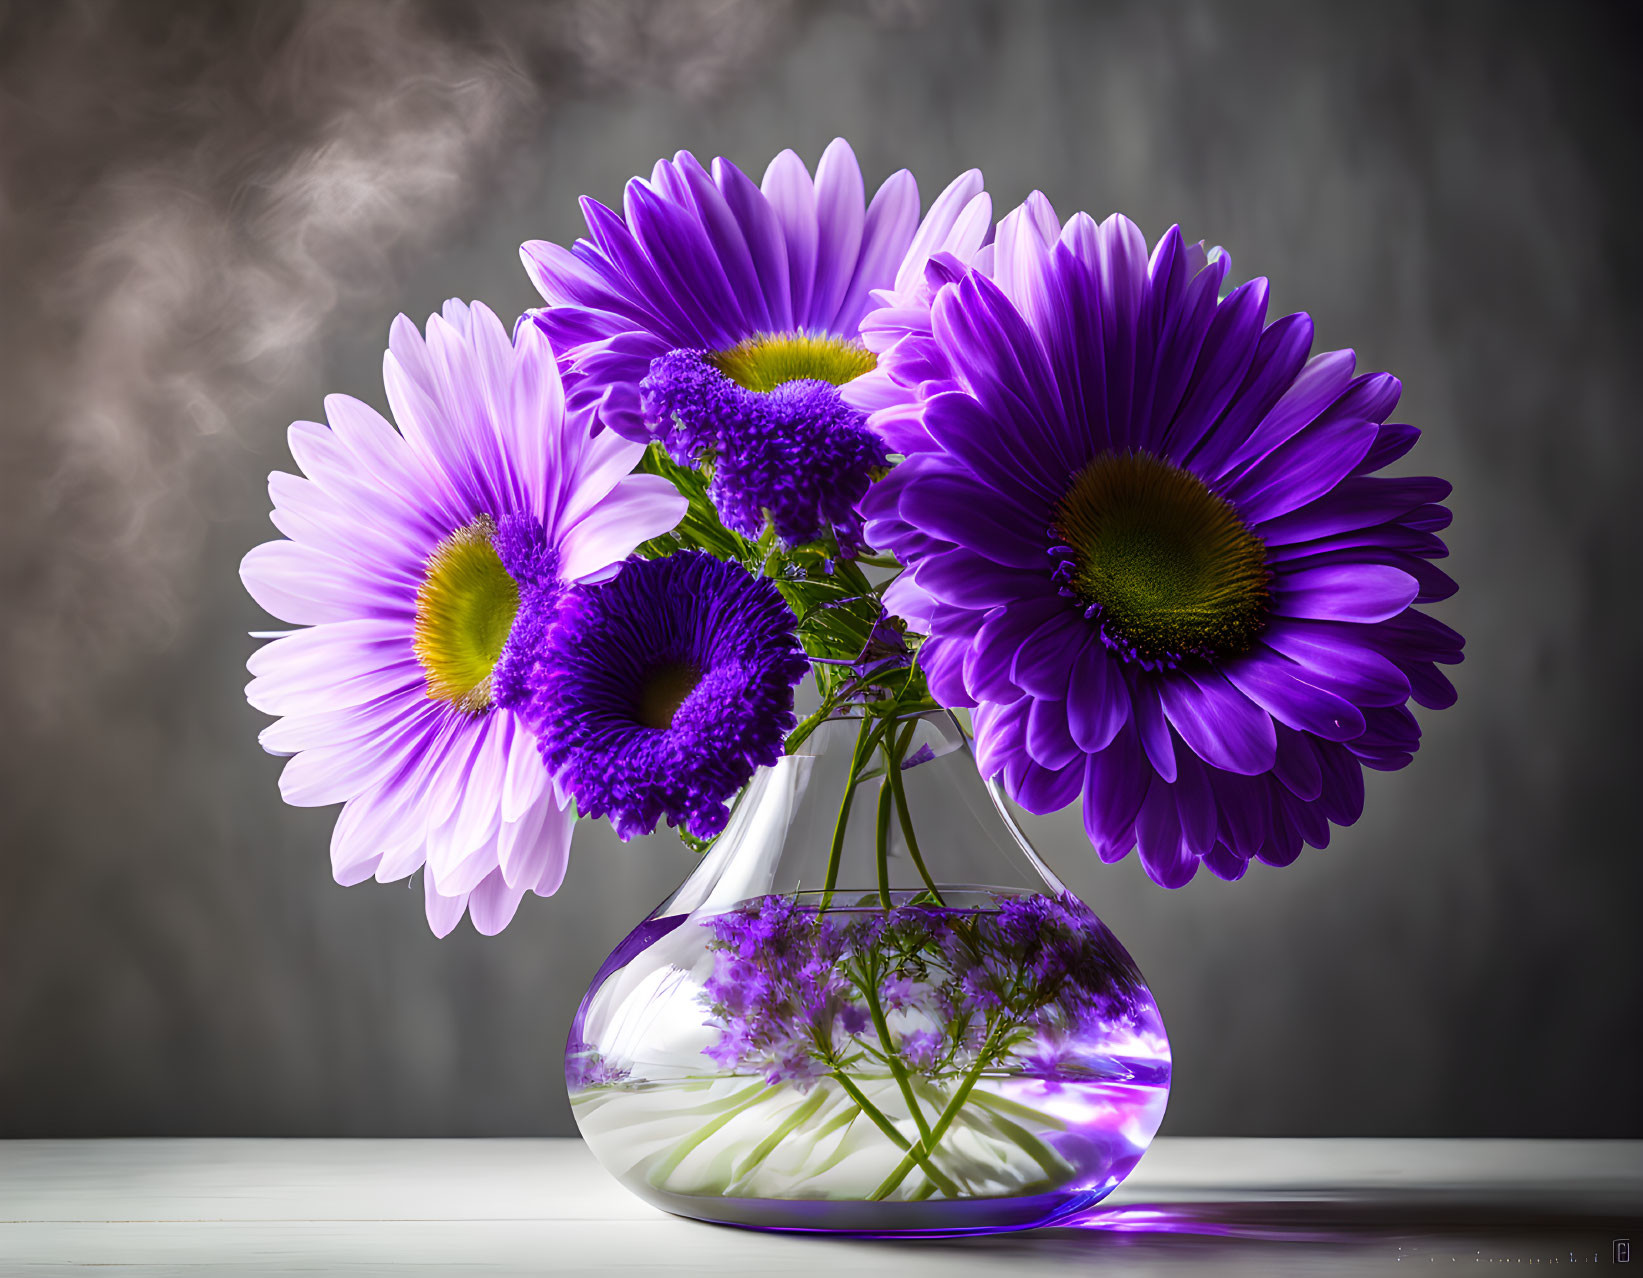  A hauntingly beautiful vase of purple daisies wit